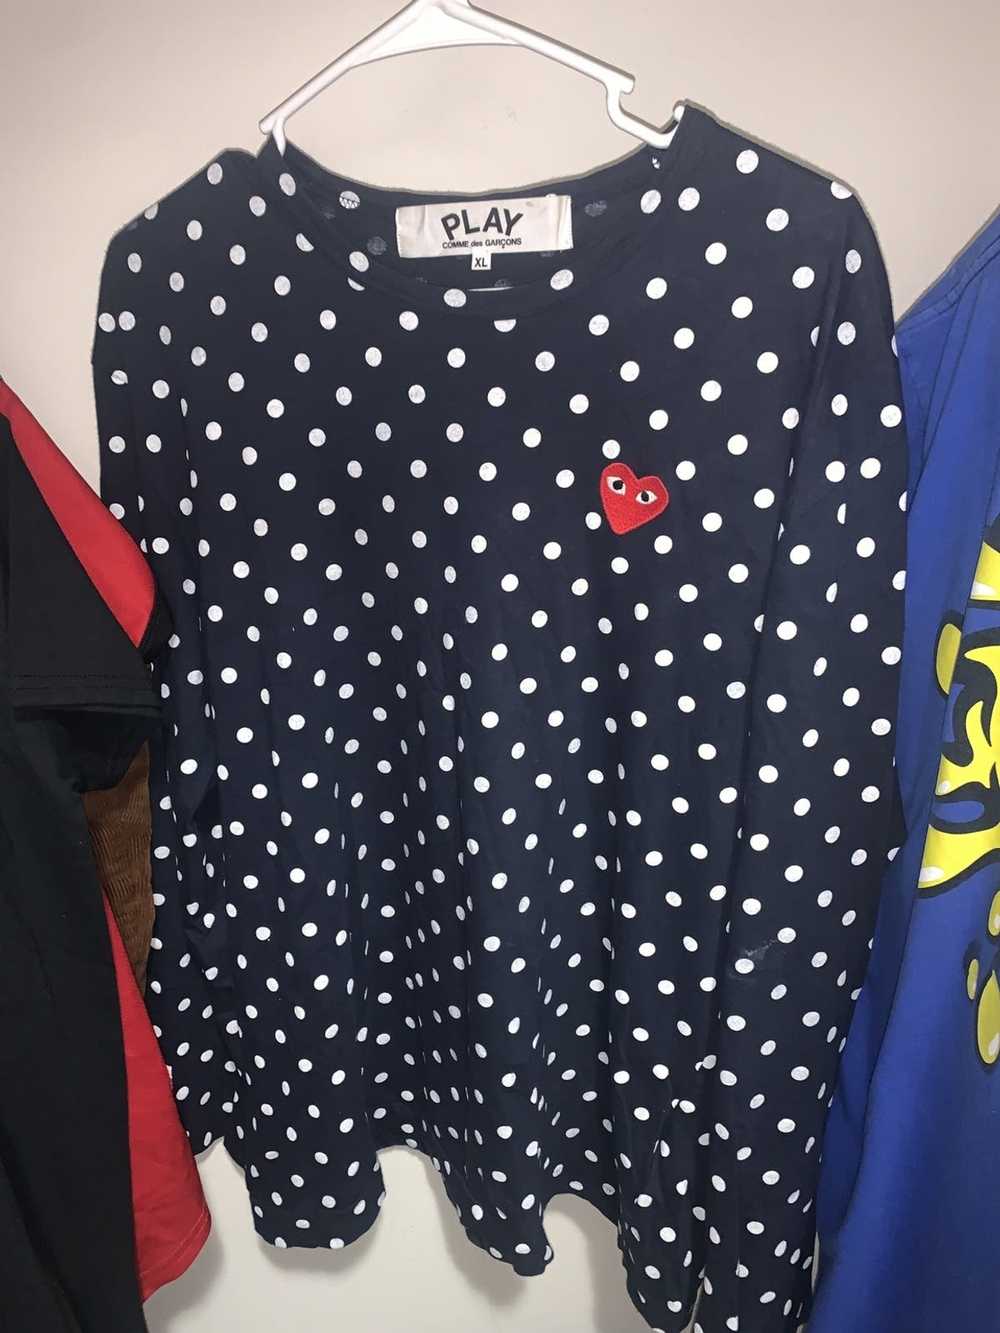 Comme des Garcons Play L/S Blue Polka Dot Tee - image 1